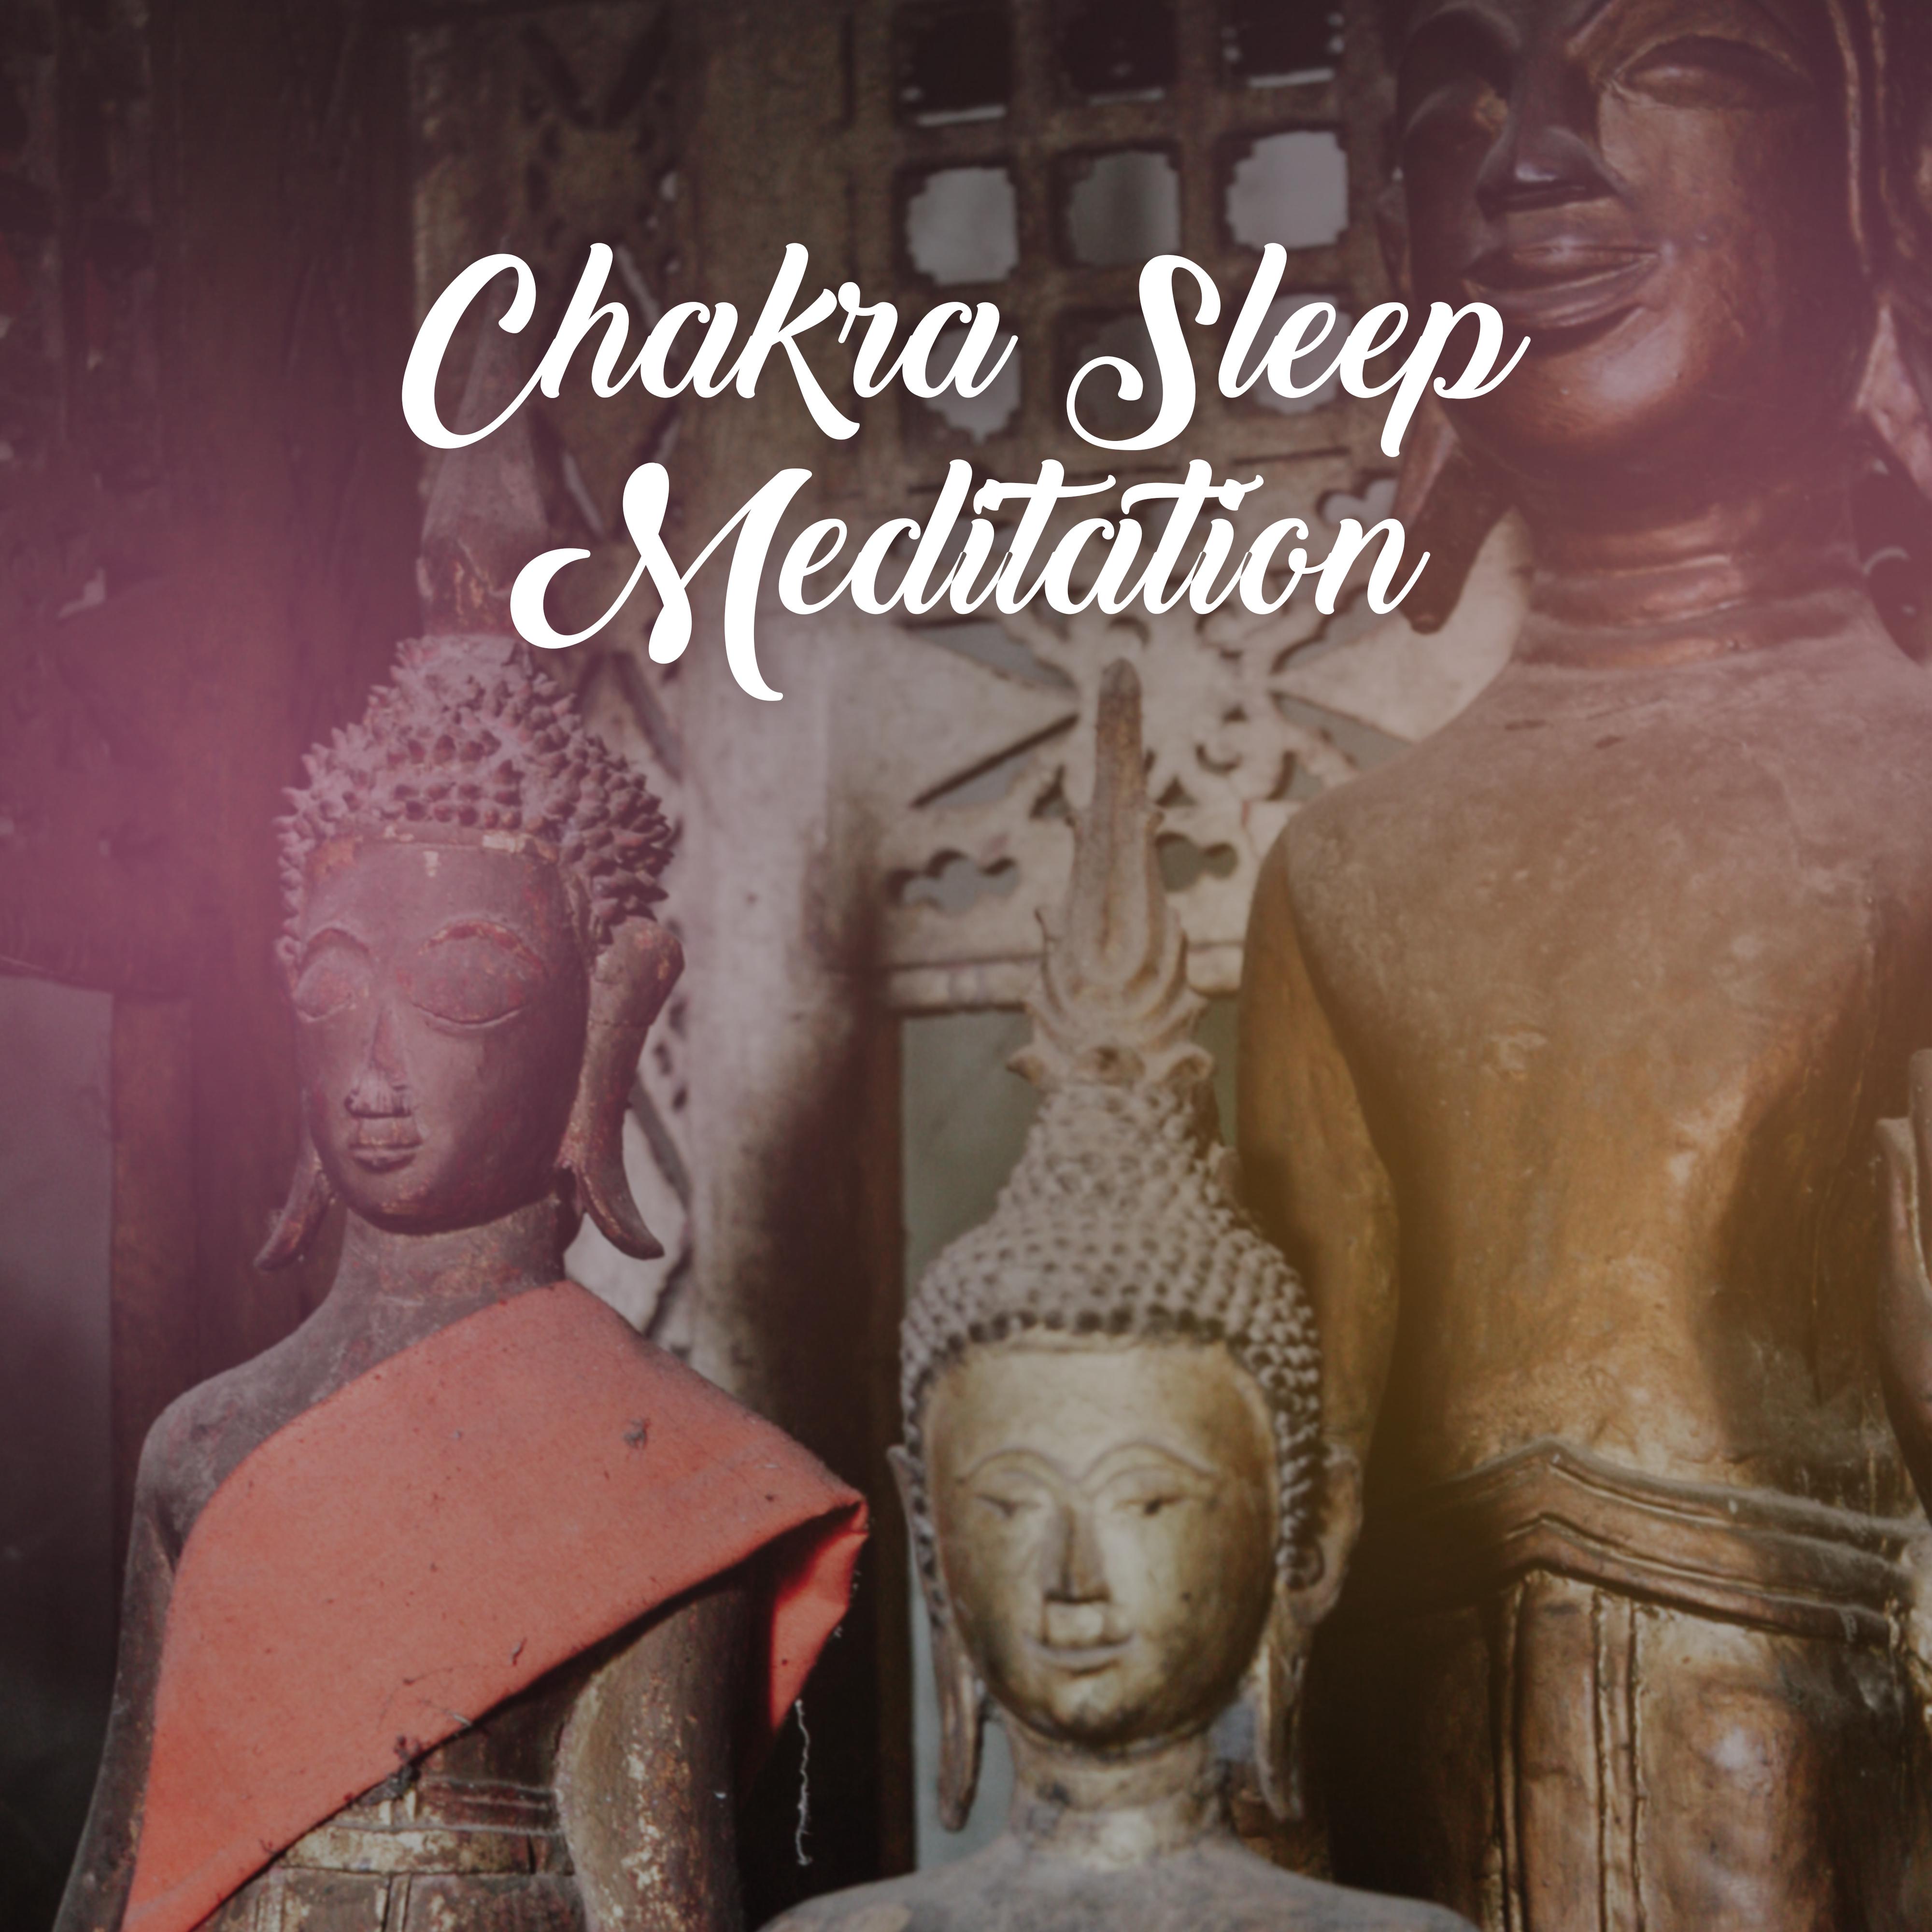 Chakra Sleep Meditation – Relaxing Sounds for Meditation, Yoga Practice, Zen Serenity, Rest, Spa, Sleep, Gentle Meditation Music, Calm Down, Pure Therapy